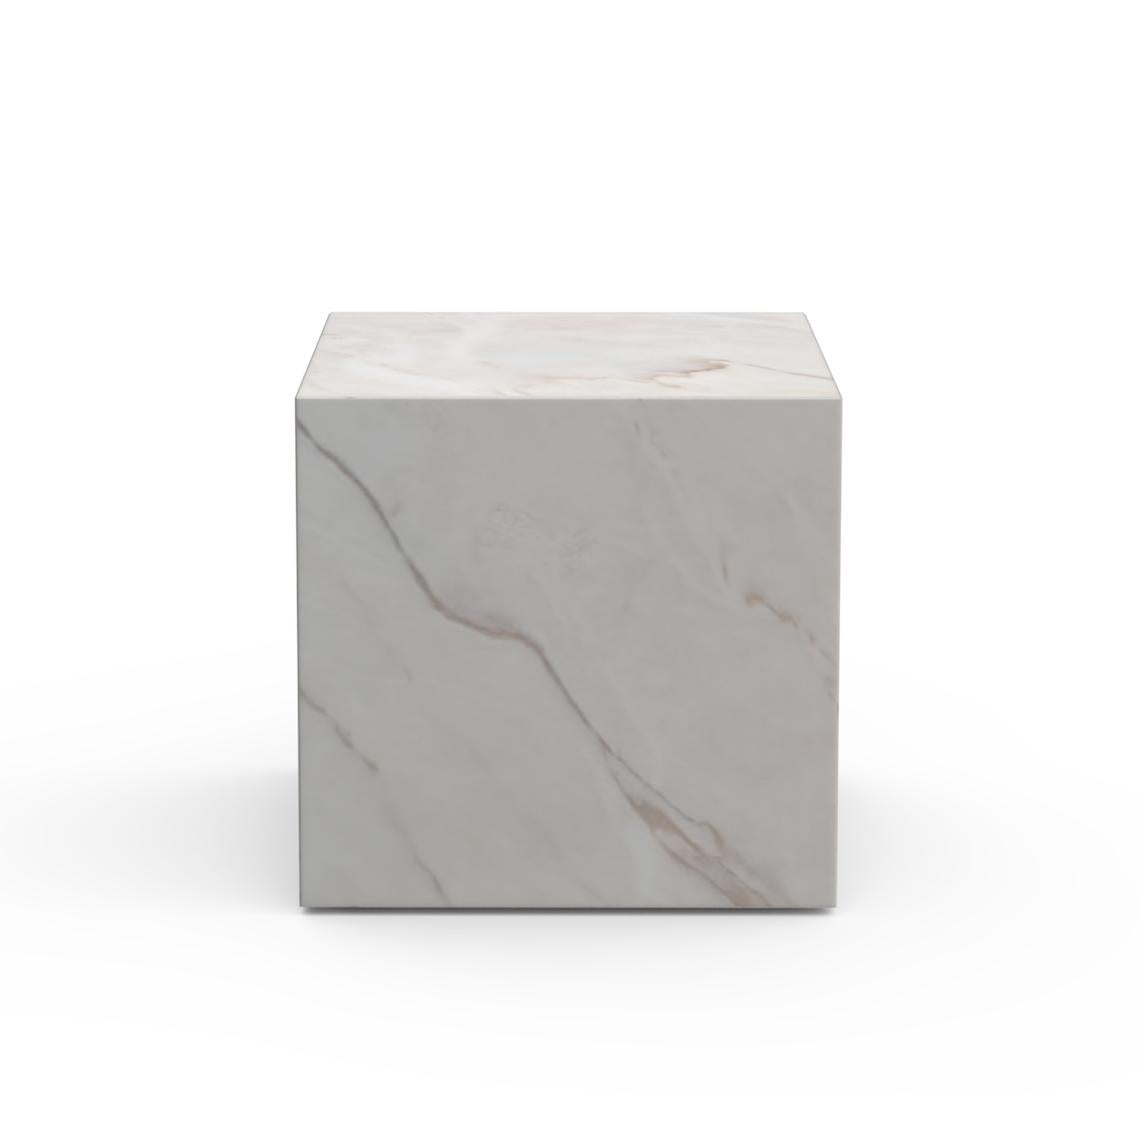 Portuguese Modern Marble Cube Side Table Pedestal Sculpture Handmade Portugal by Greenapple For Sale